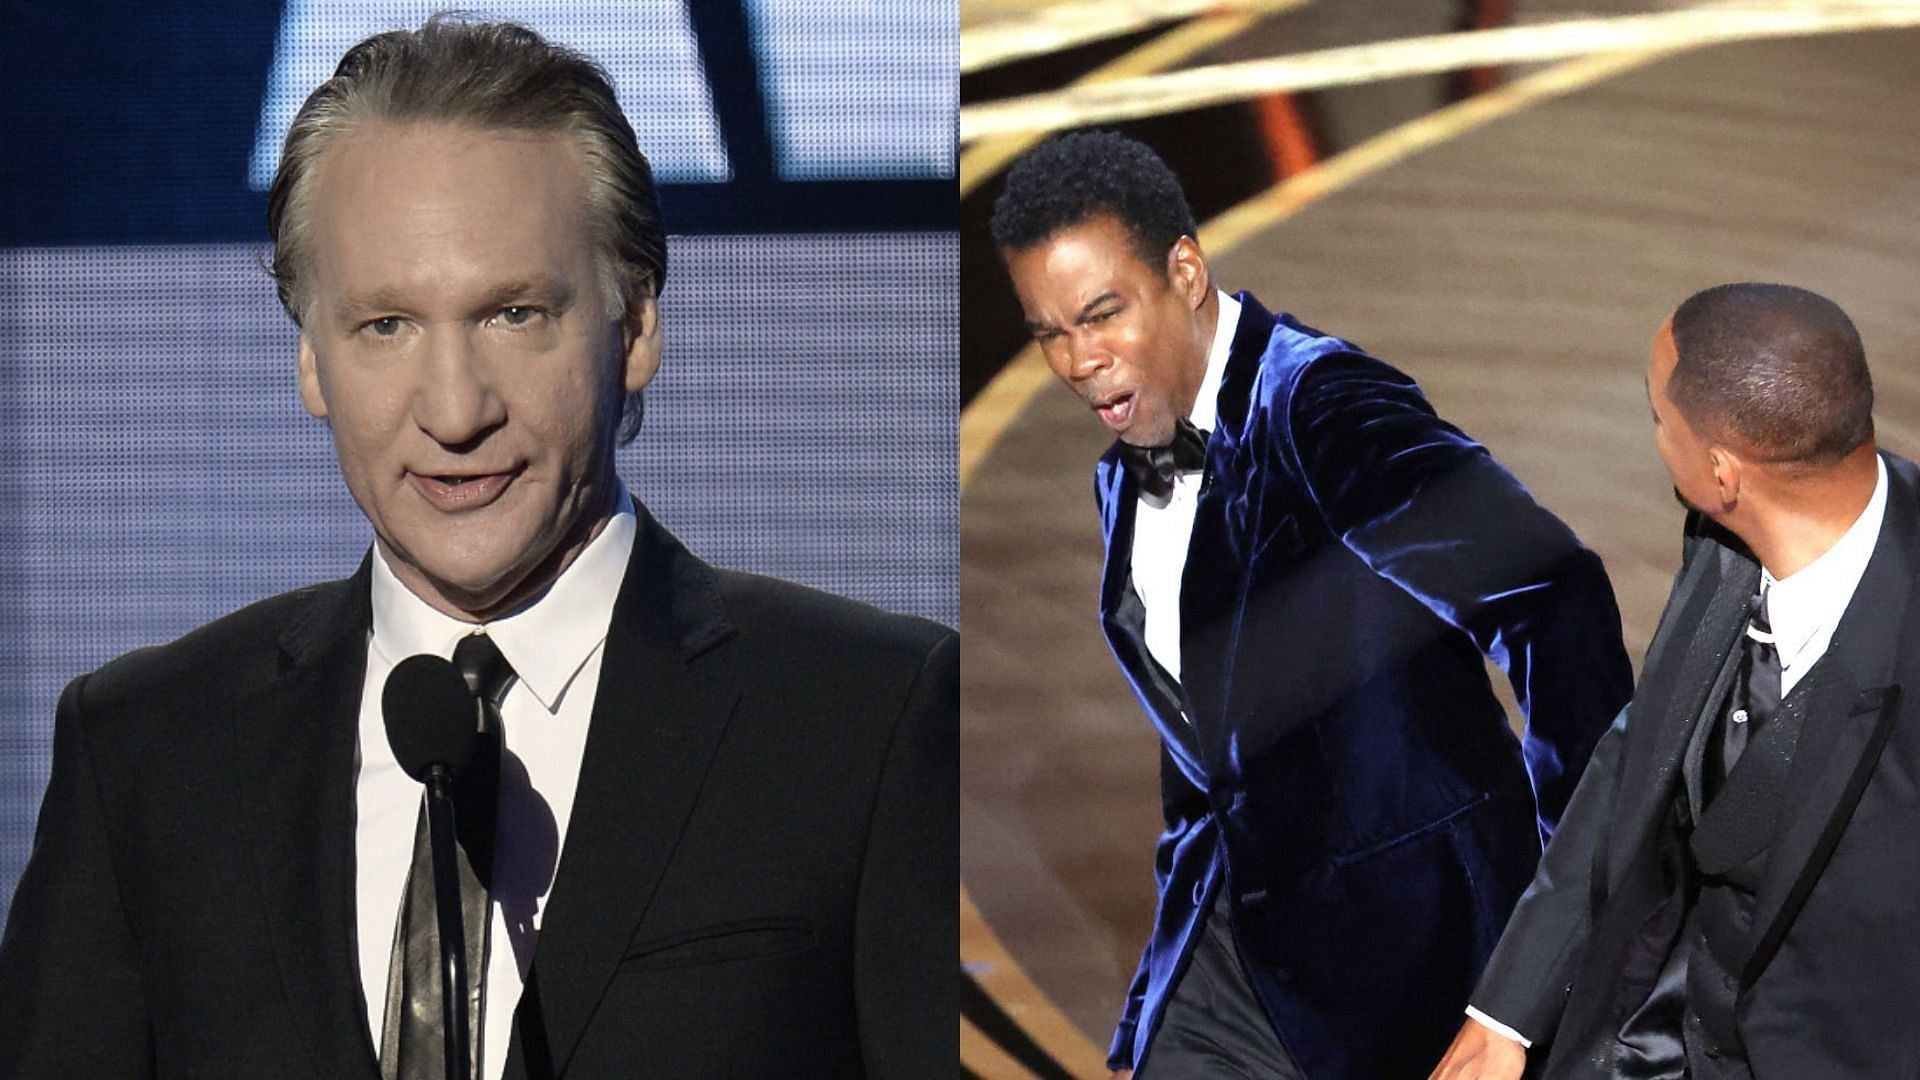 Bill Maher condemned Will Smith&#039;s Oscars slap once again in his Explaining Jokes to Idiots segment (Image via Kevin Winter/Getty Images and Myung Chun/Getty Images)